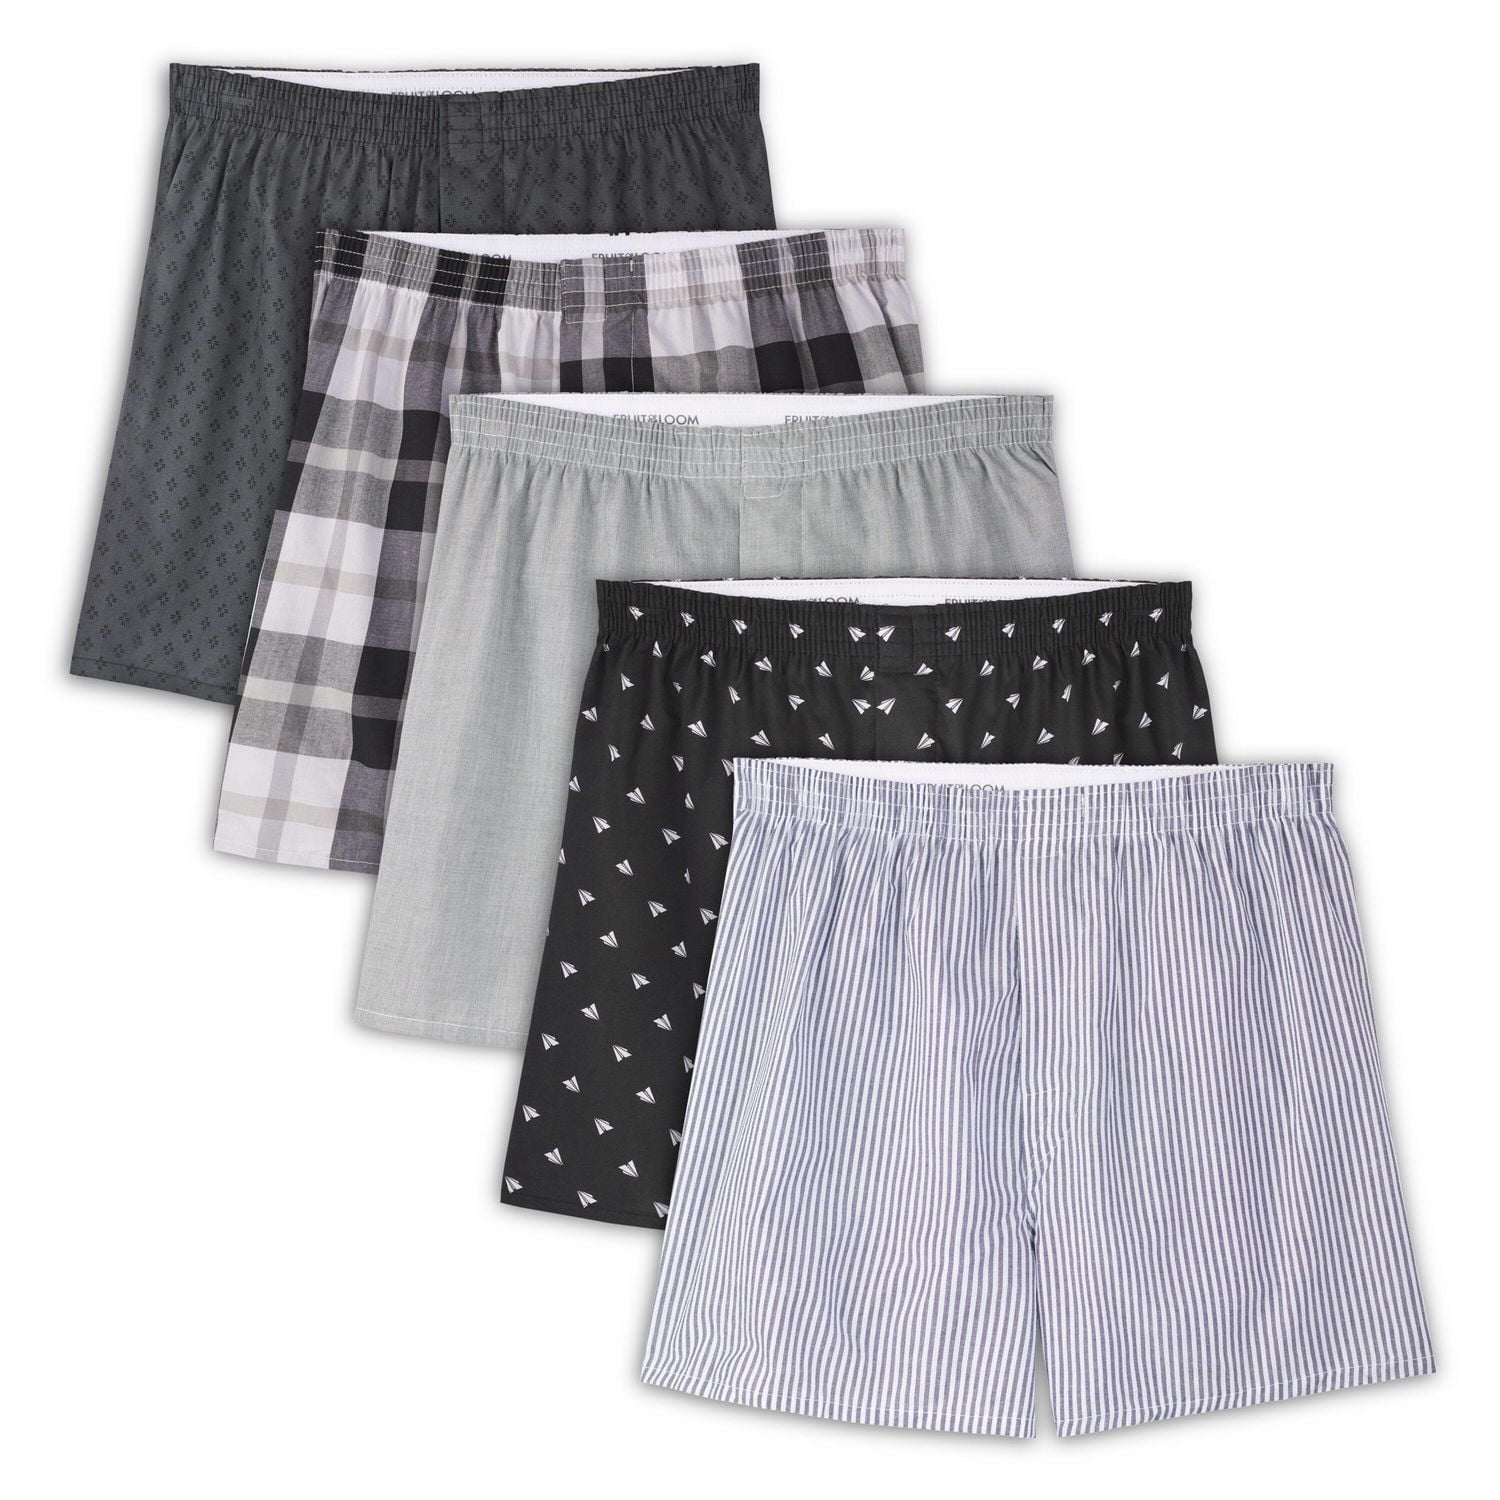 Men's Assorted Cotton Knit Boxers - 5 Pack by Fruit Of The Loom